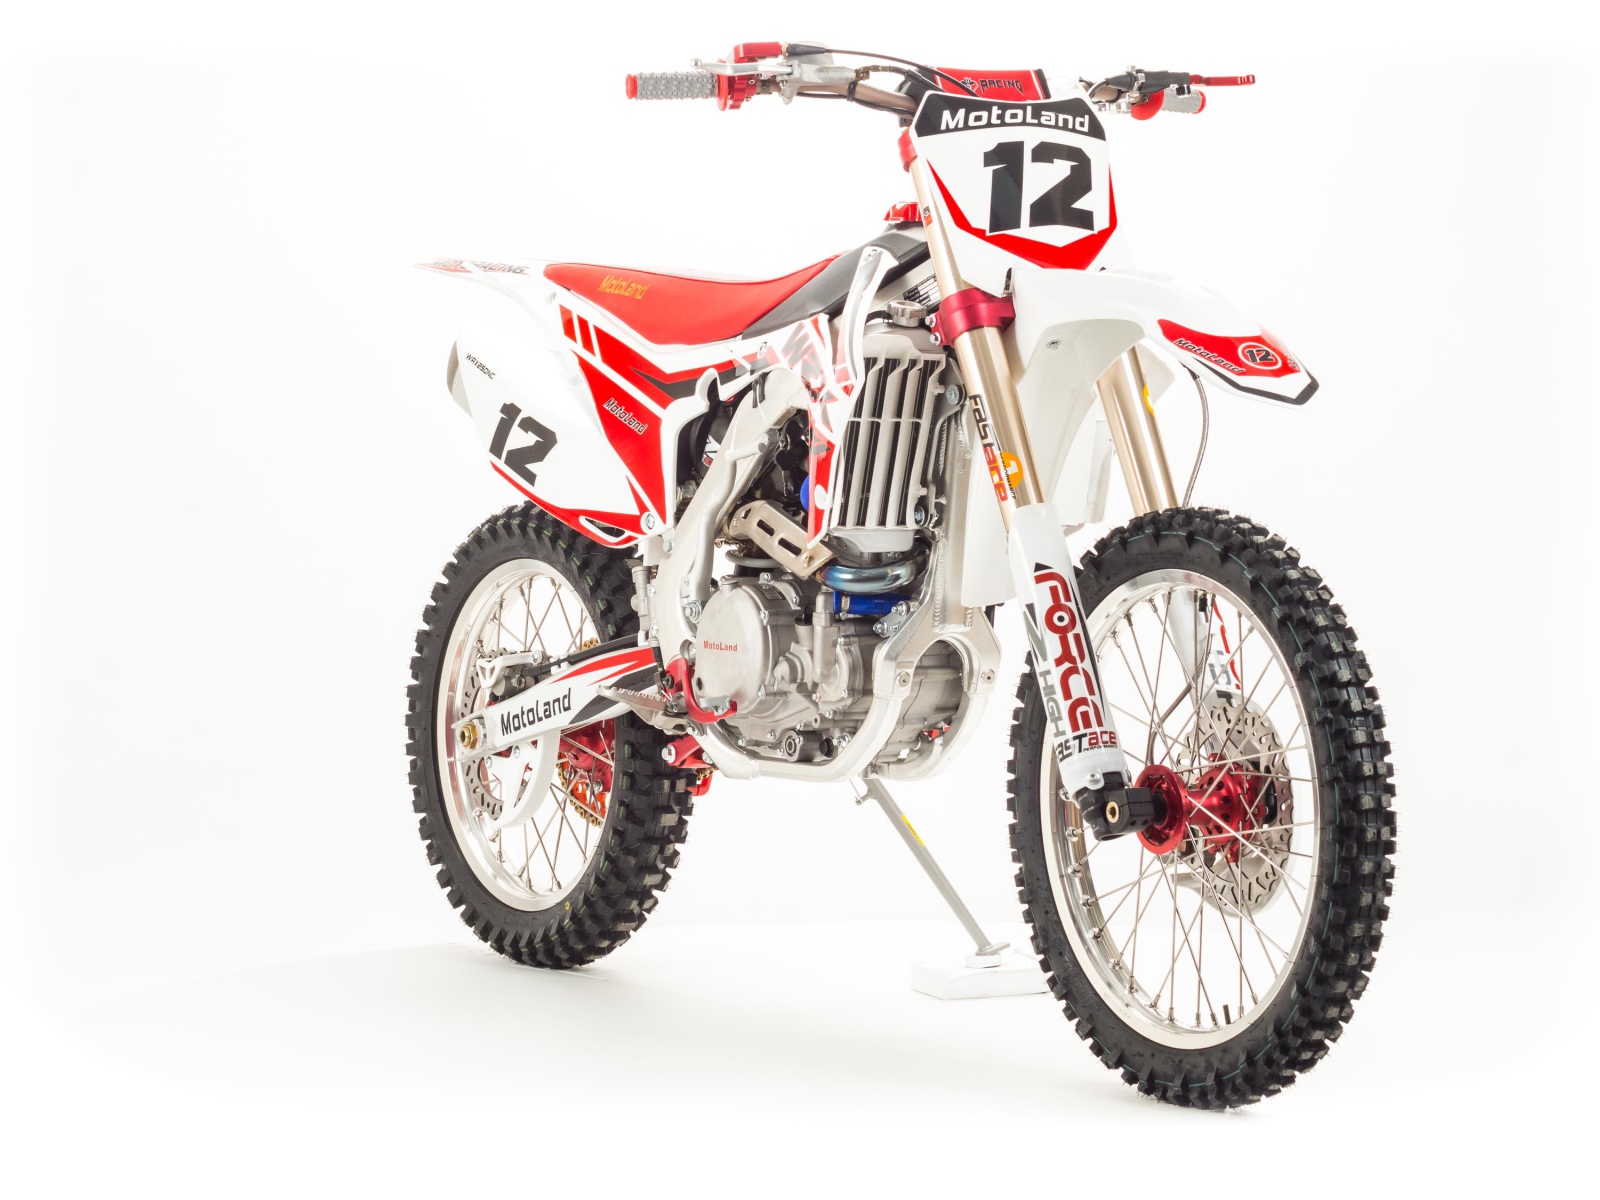 Motorcycle CROSS 250 WRX250 NC on a white background